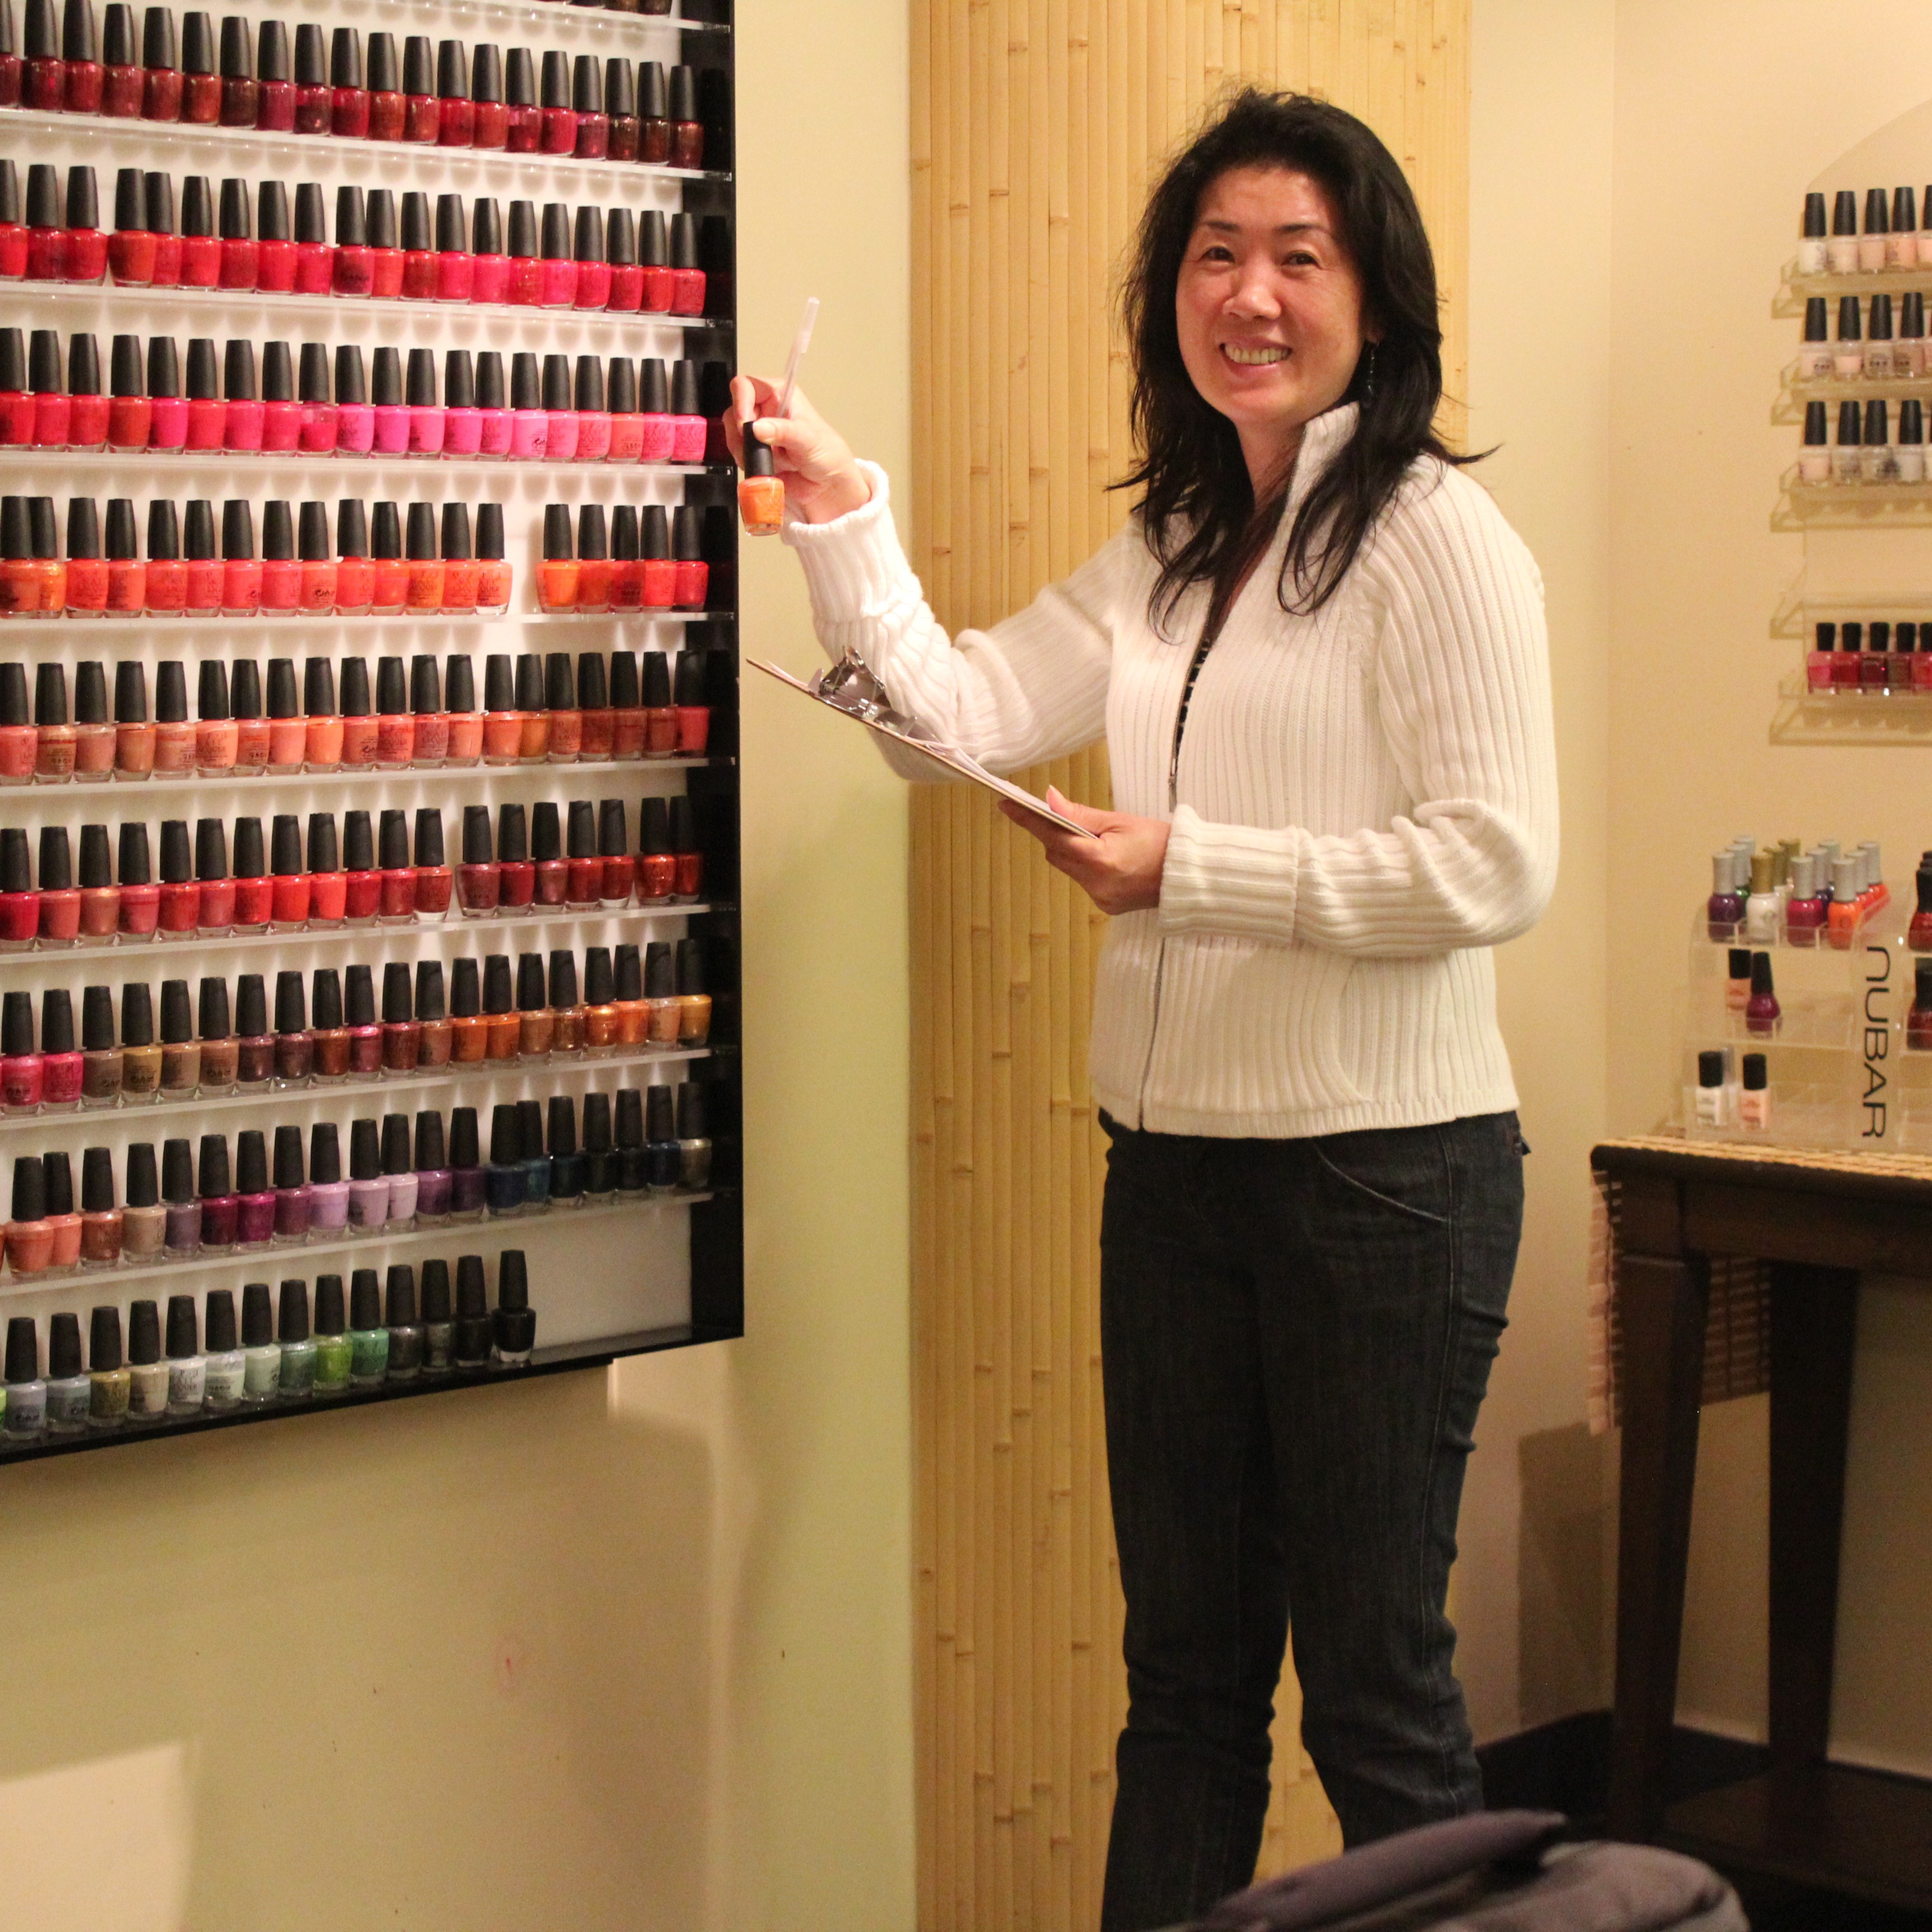 Nail salon owner examines the wall of nail polishes. A lot of them seem to be the color red.